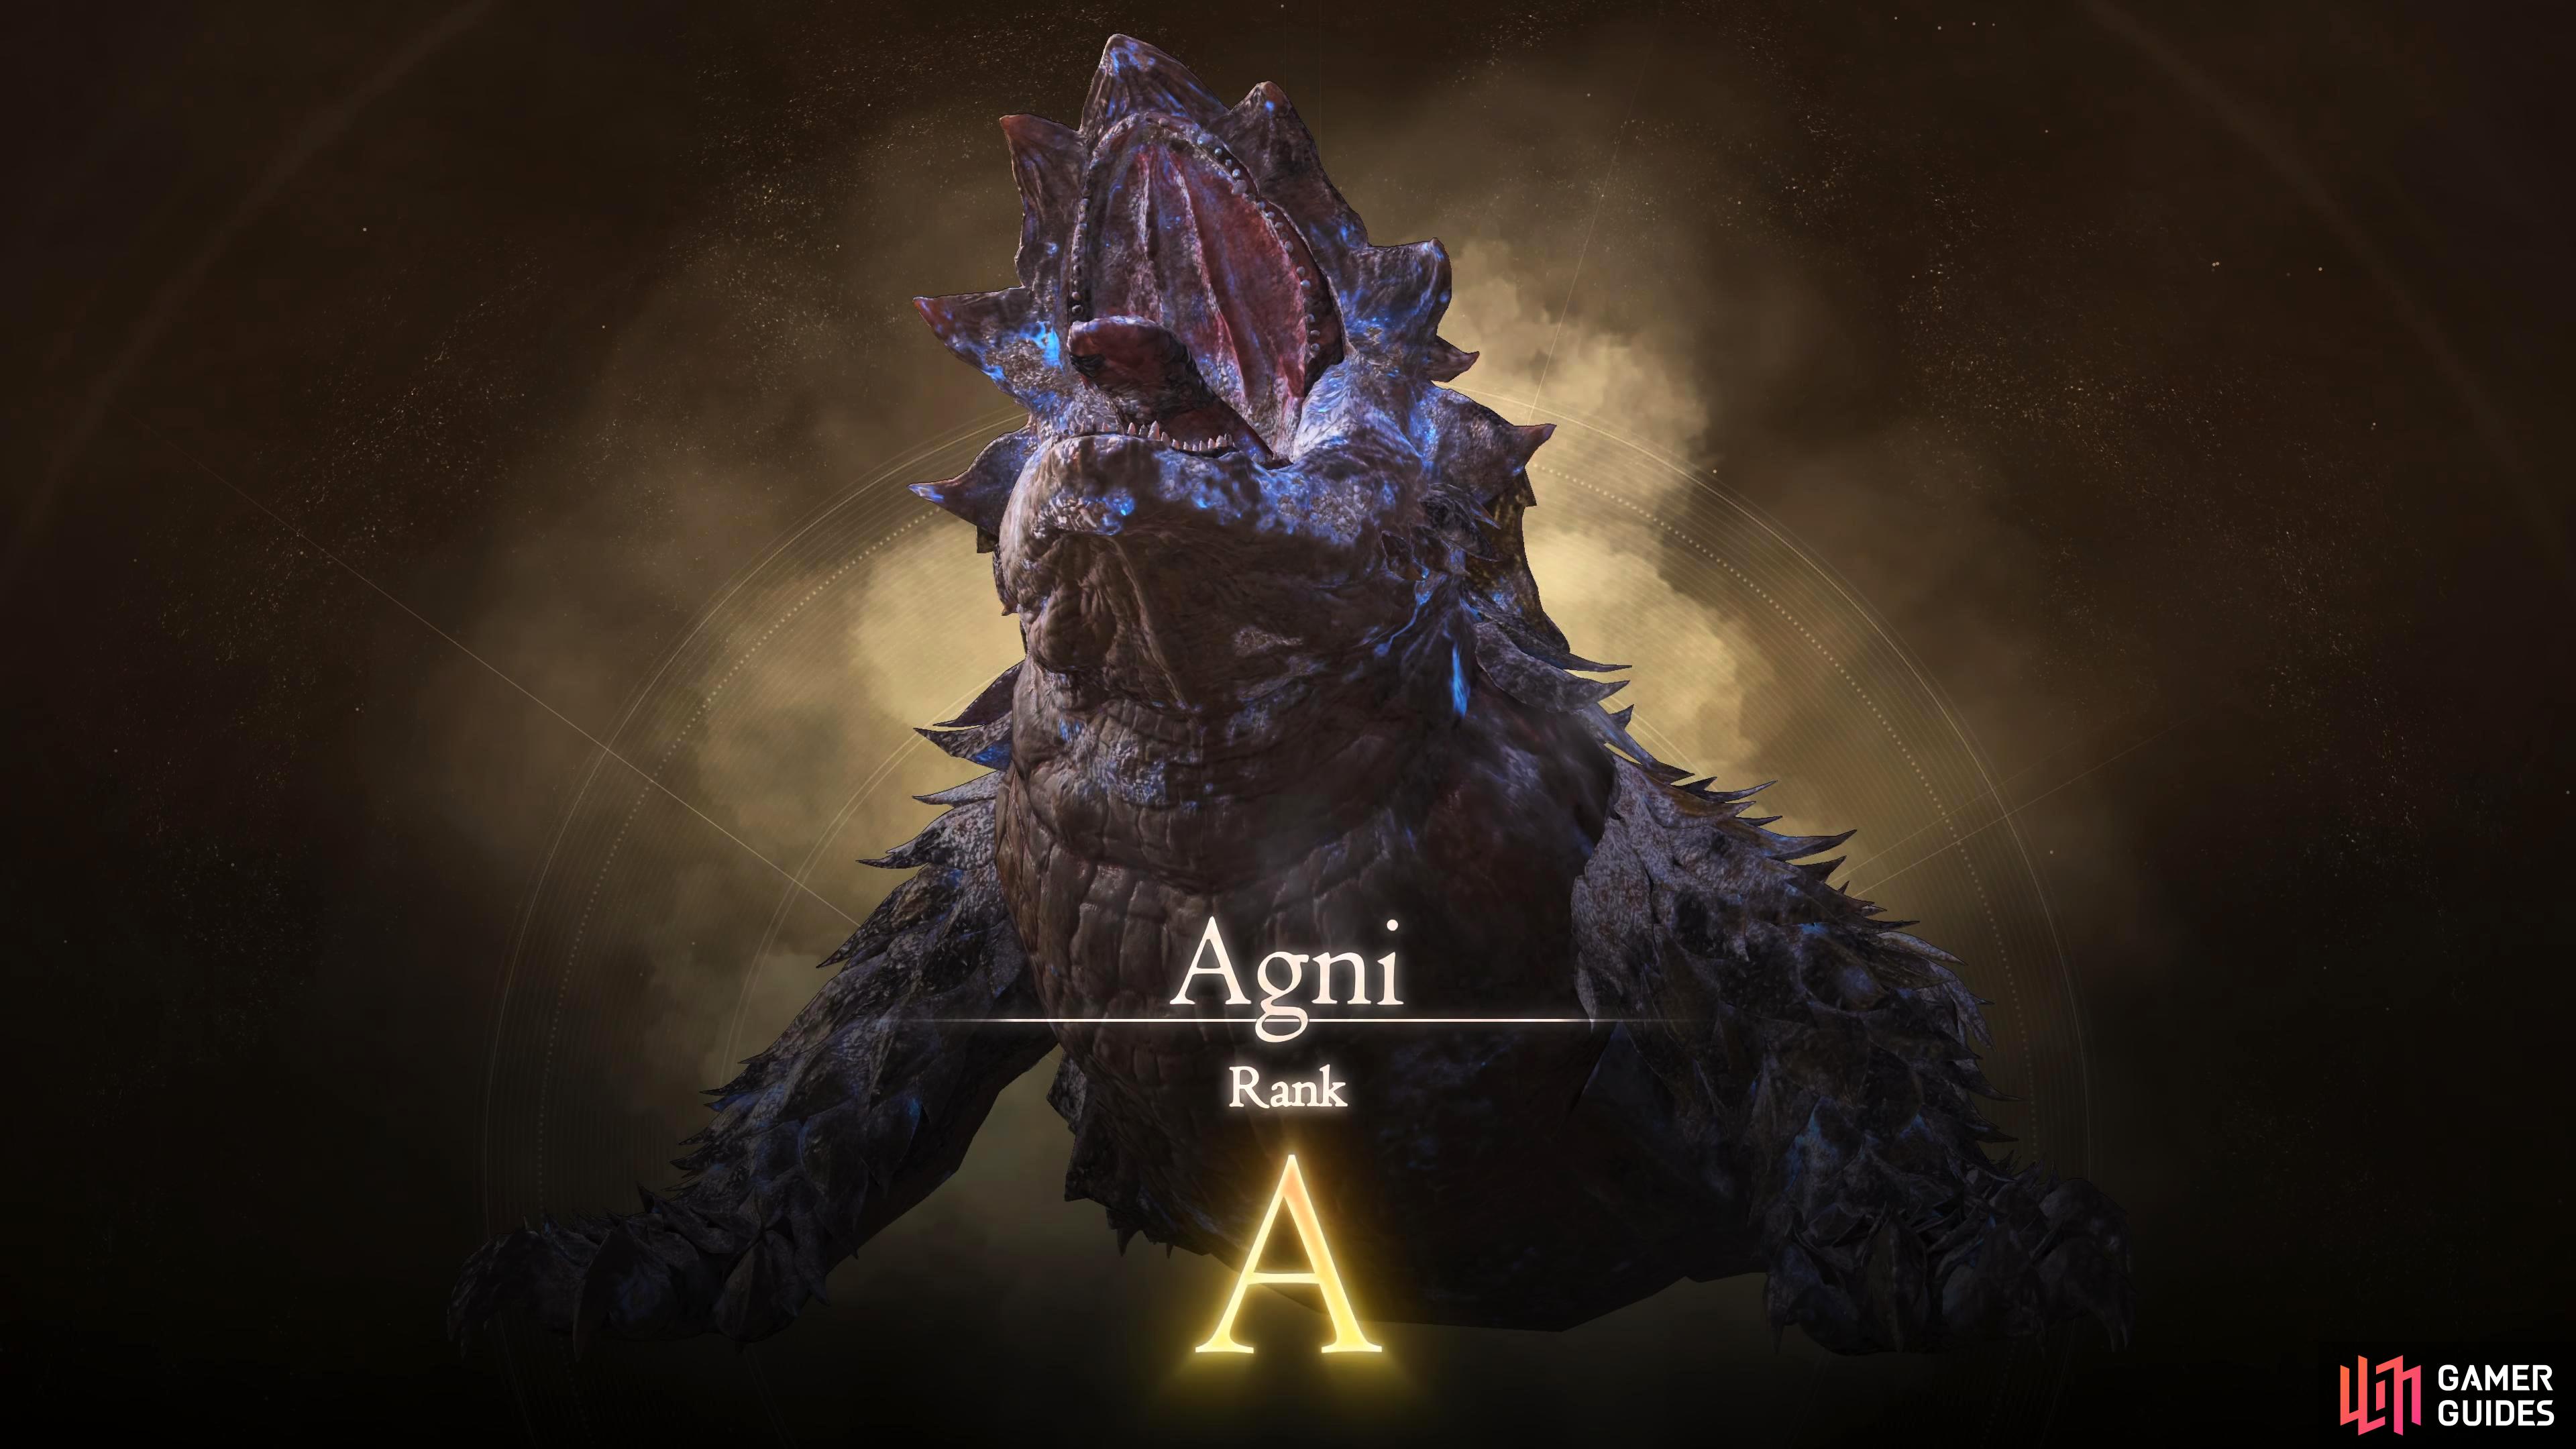 Agni can be fought after you’ve reached the Brotherhood main scenario quest.